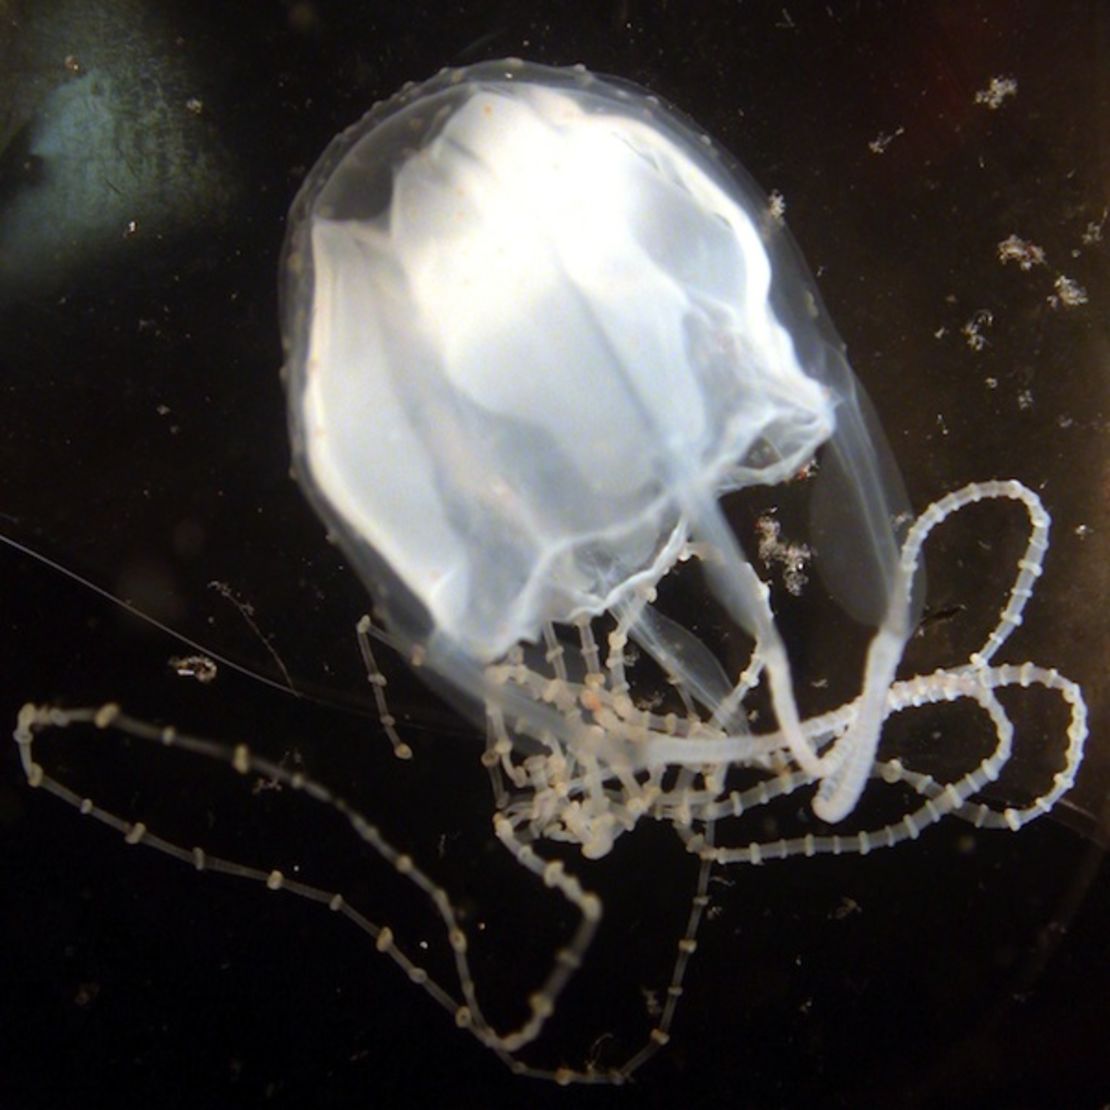 The Irukandji jellyfish is only the size of a thimble.